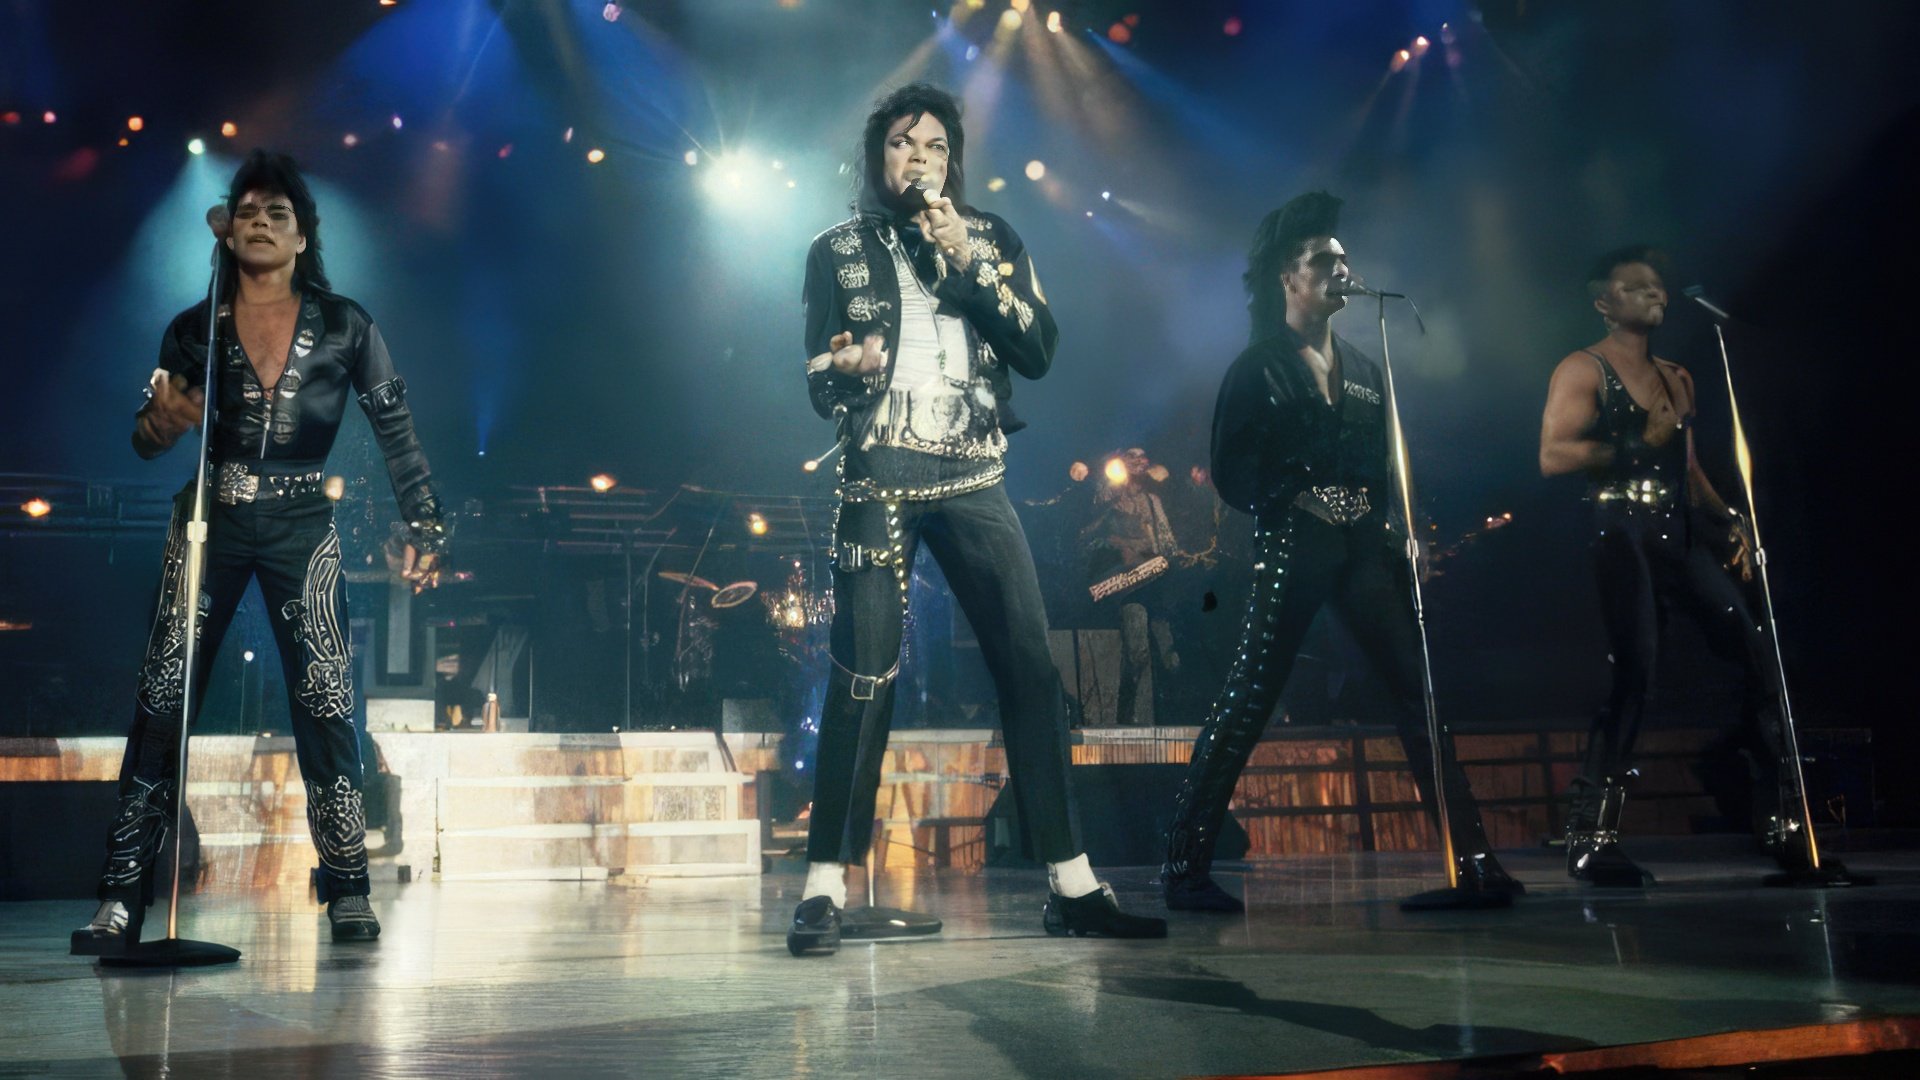 Every performance of Michael Jackson was a spectacle